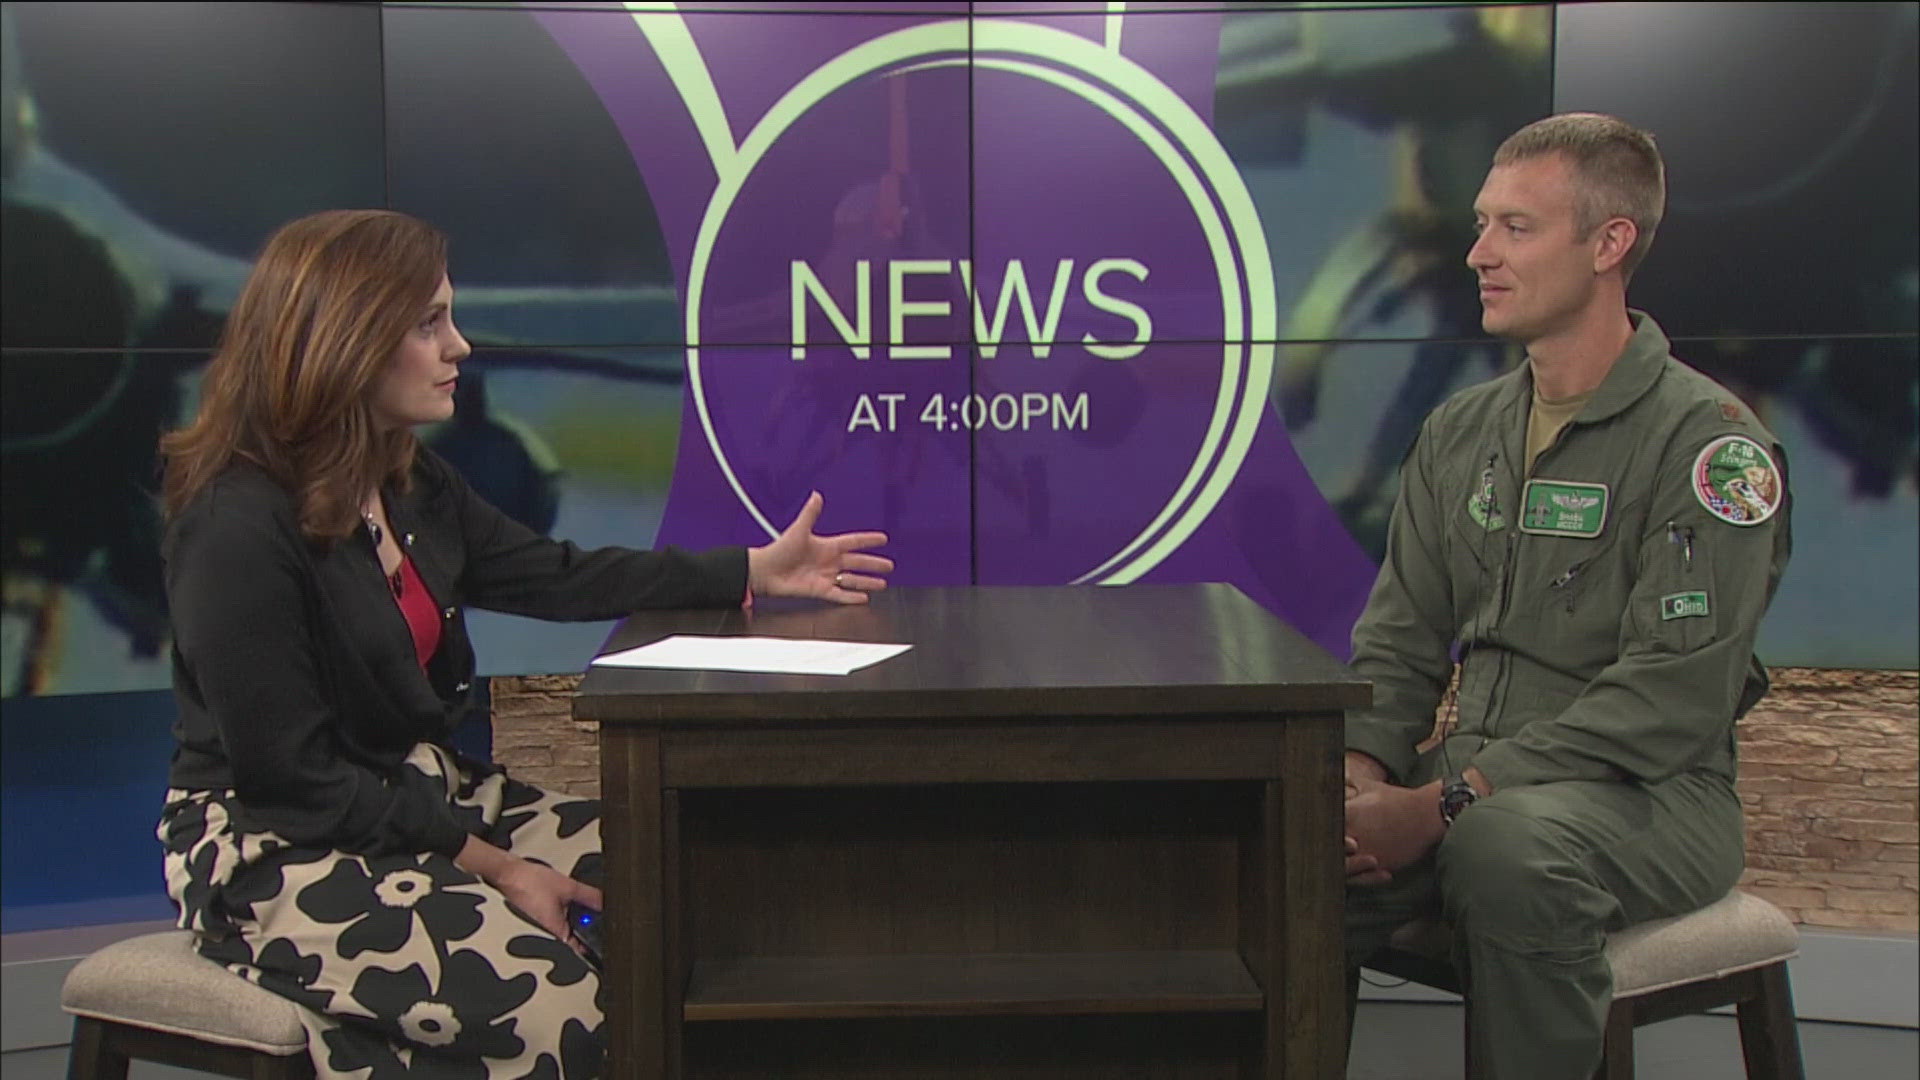 Major Phillip McCoy, an F-16 fighter pilot with the 180th Fighter Wing, talks with Amanda Fay about the training that will cause a loud sonic boom in the area.